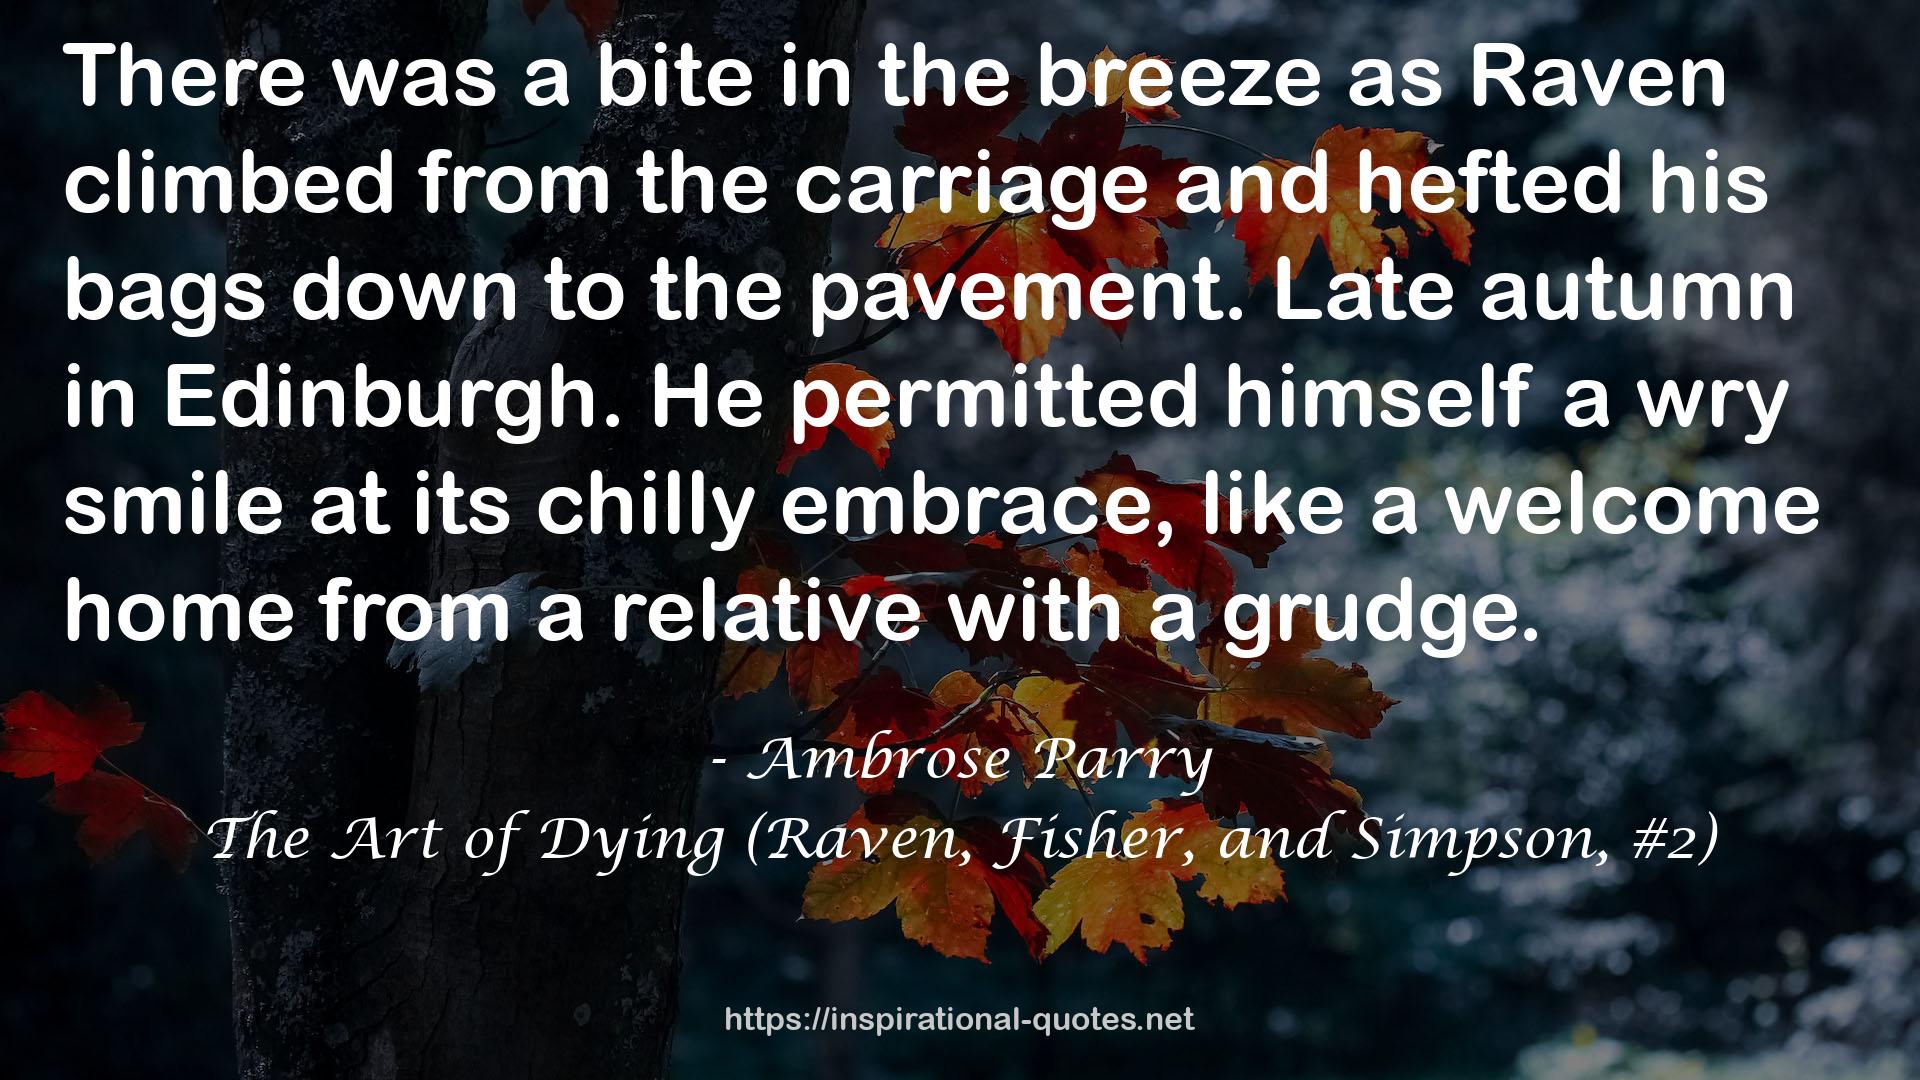 The Art of Dying (Raven, Fisher, and Simpson, #2) QUOTES